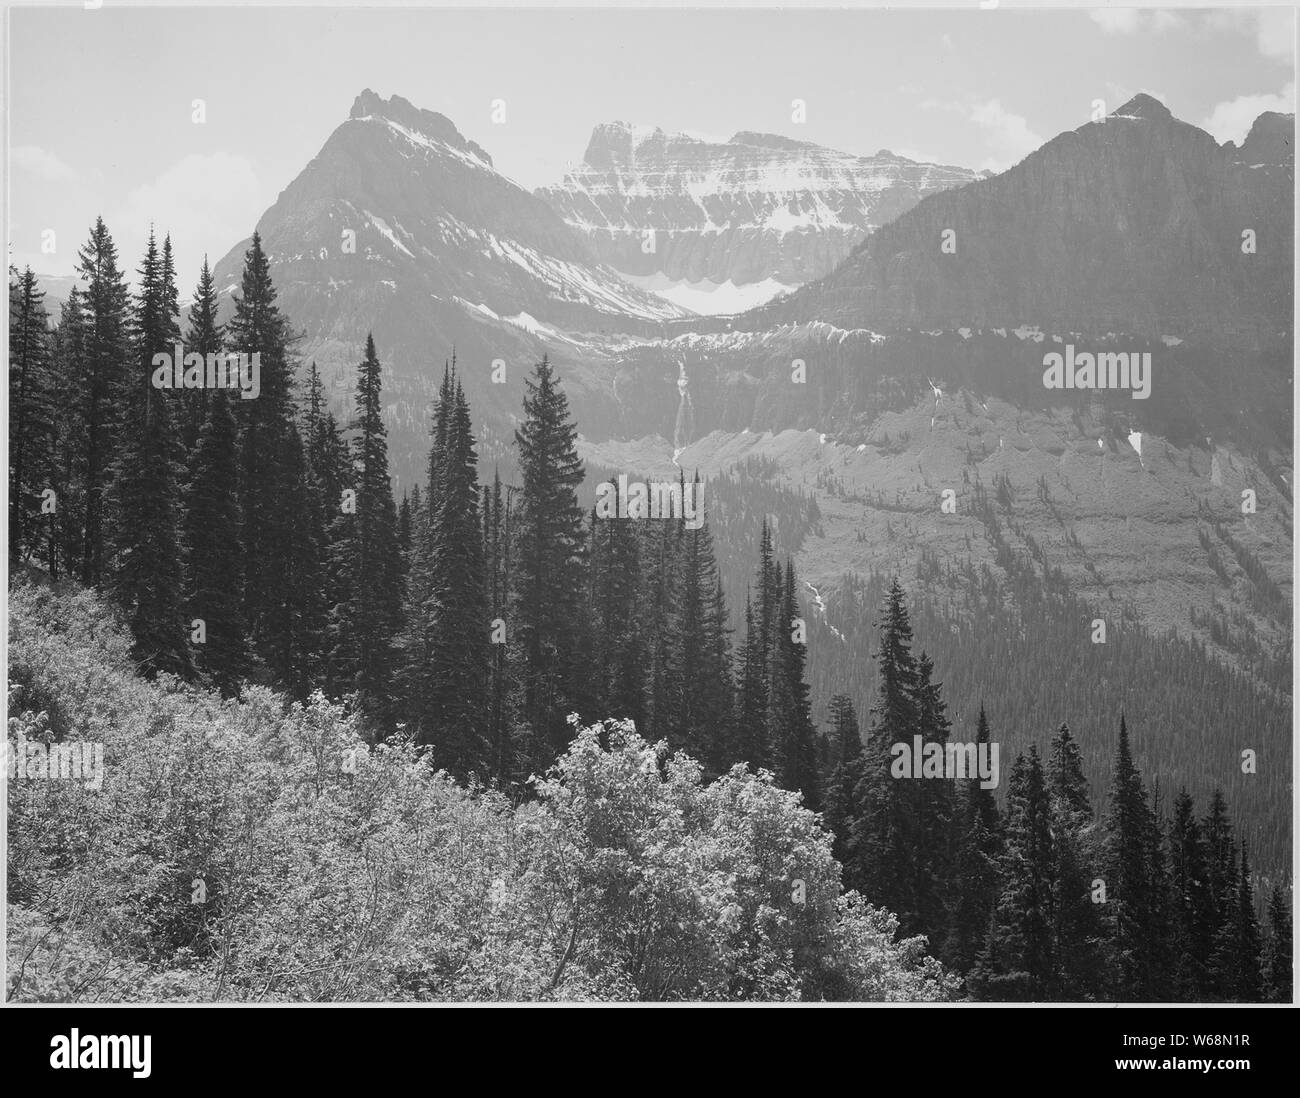 Trees and bushes in foreground, mountains in background, In Glacier National Park, Montana., 1933 - 1942 Stock Photo